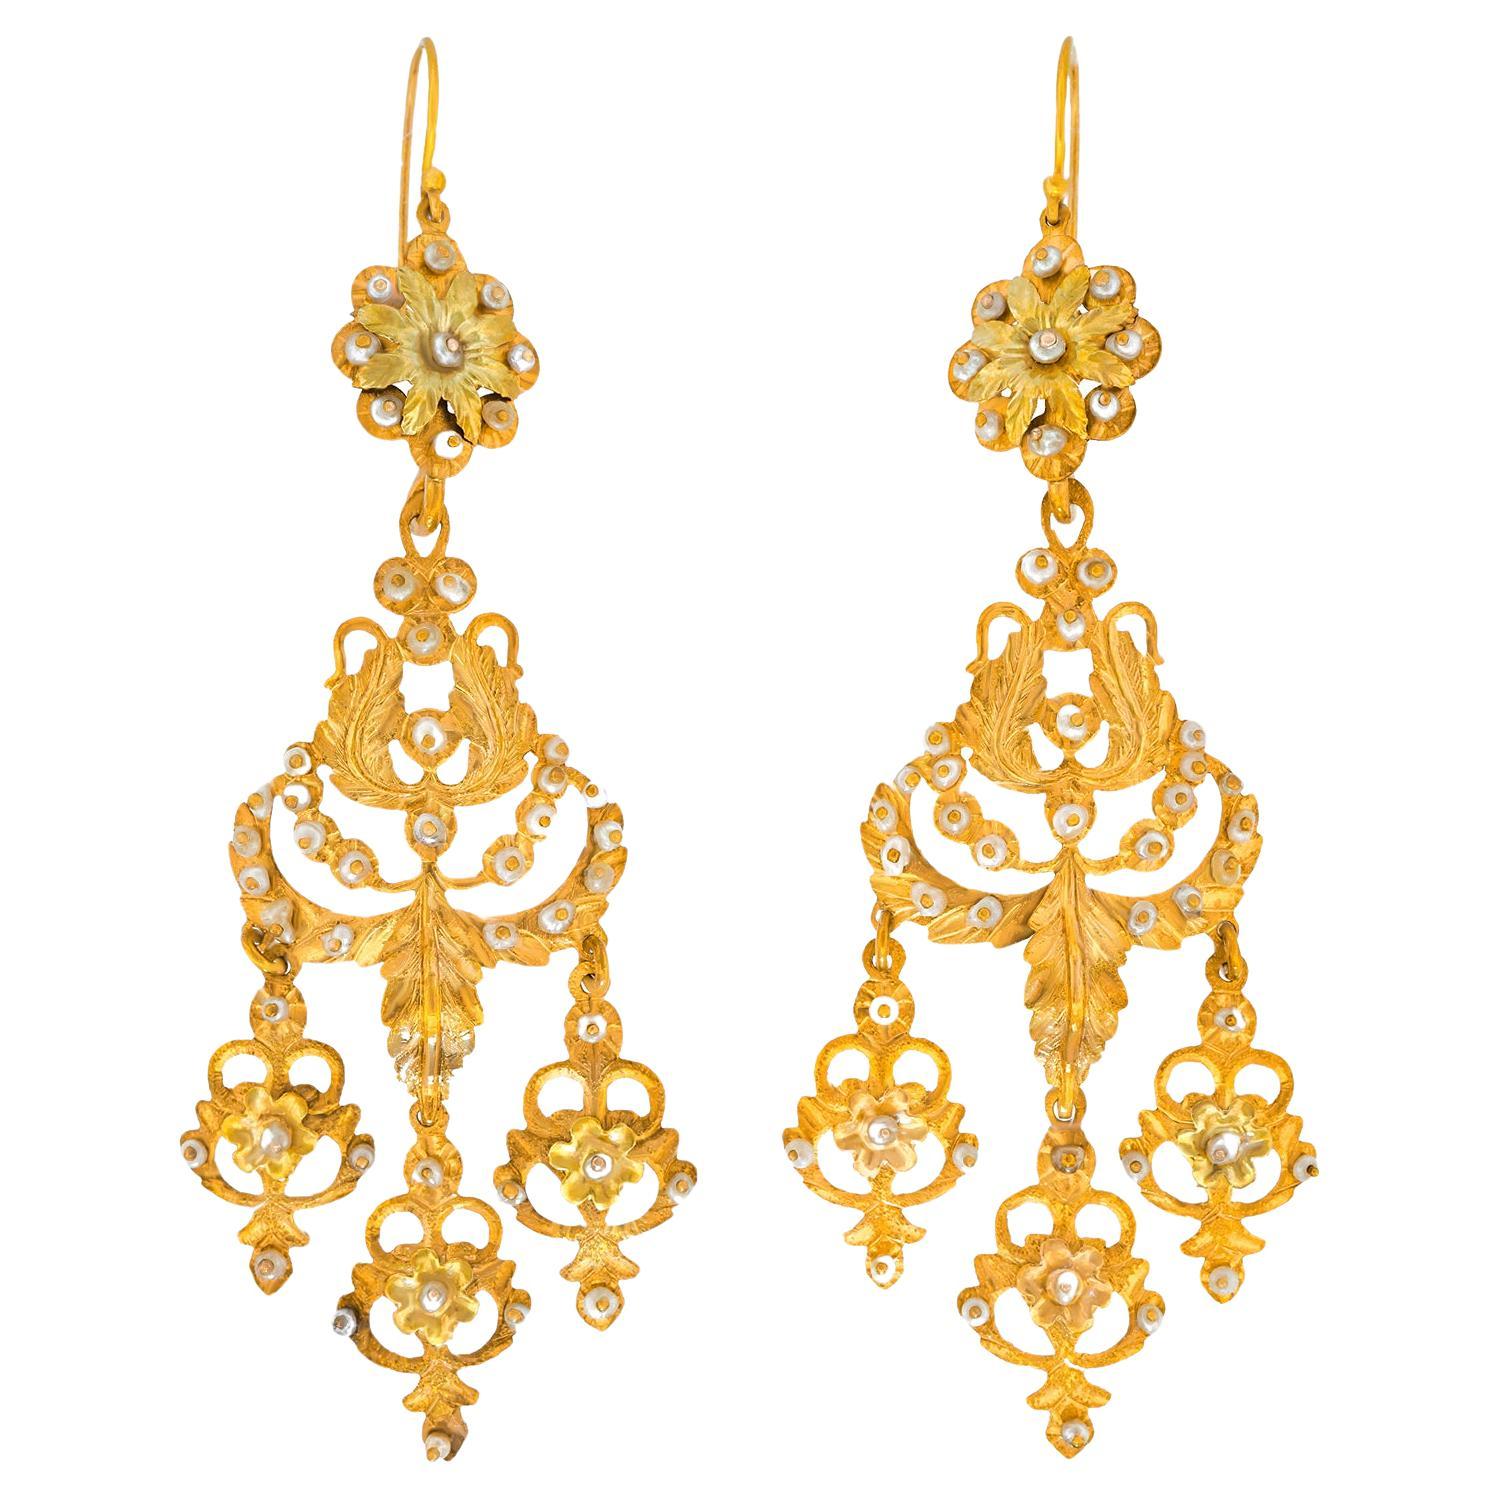 Spectacular Antique Chandelier Earrings For Sale